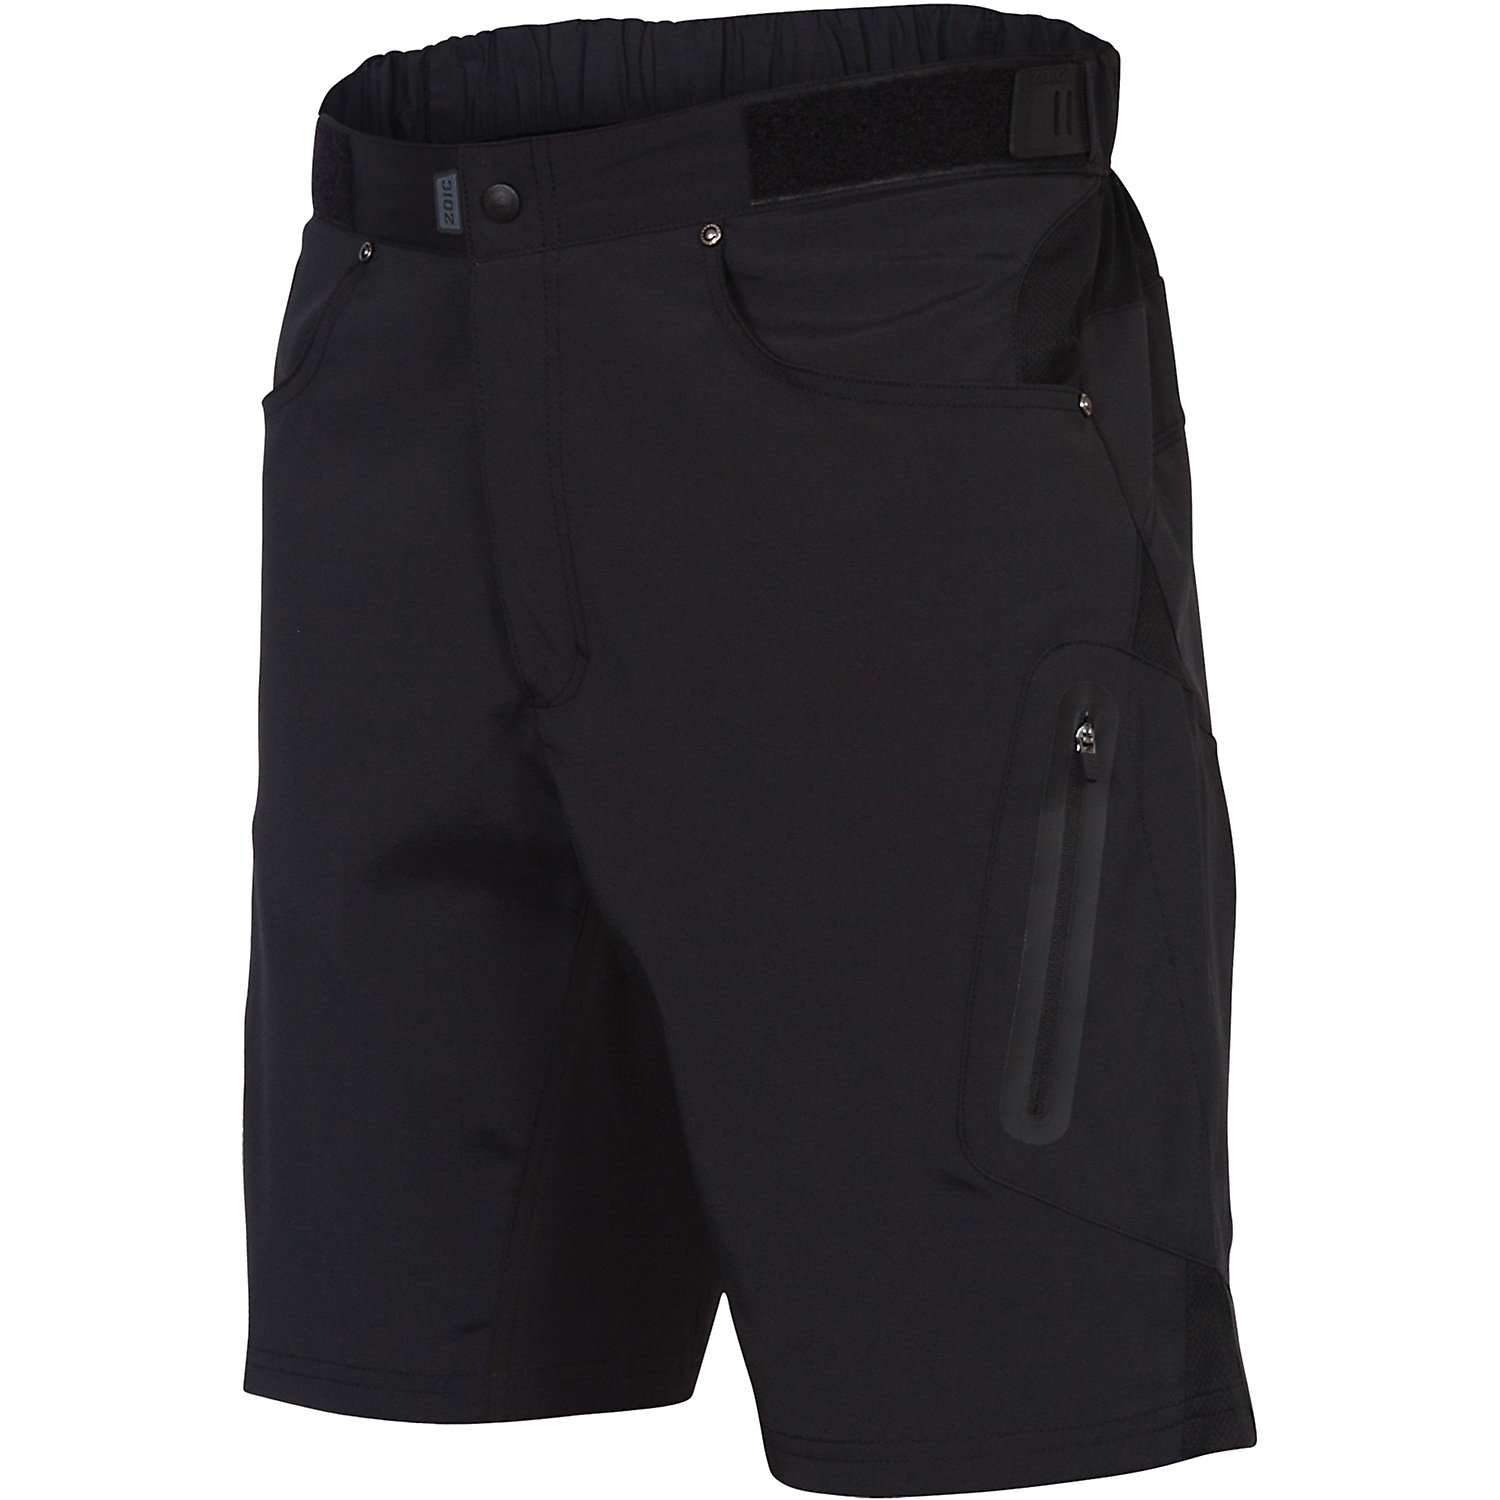 Zoic Mens Ether 9IN Short